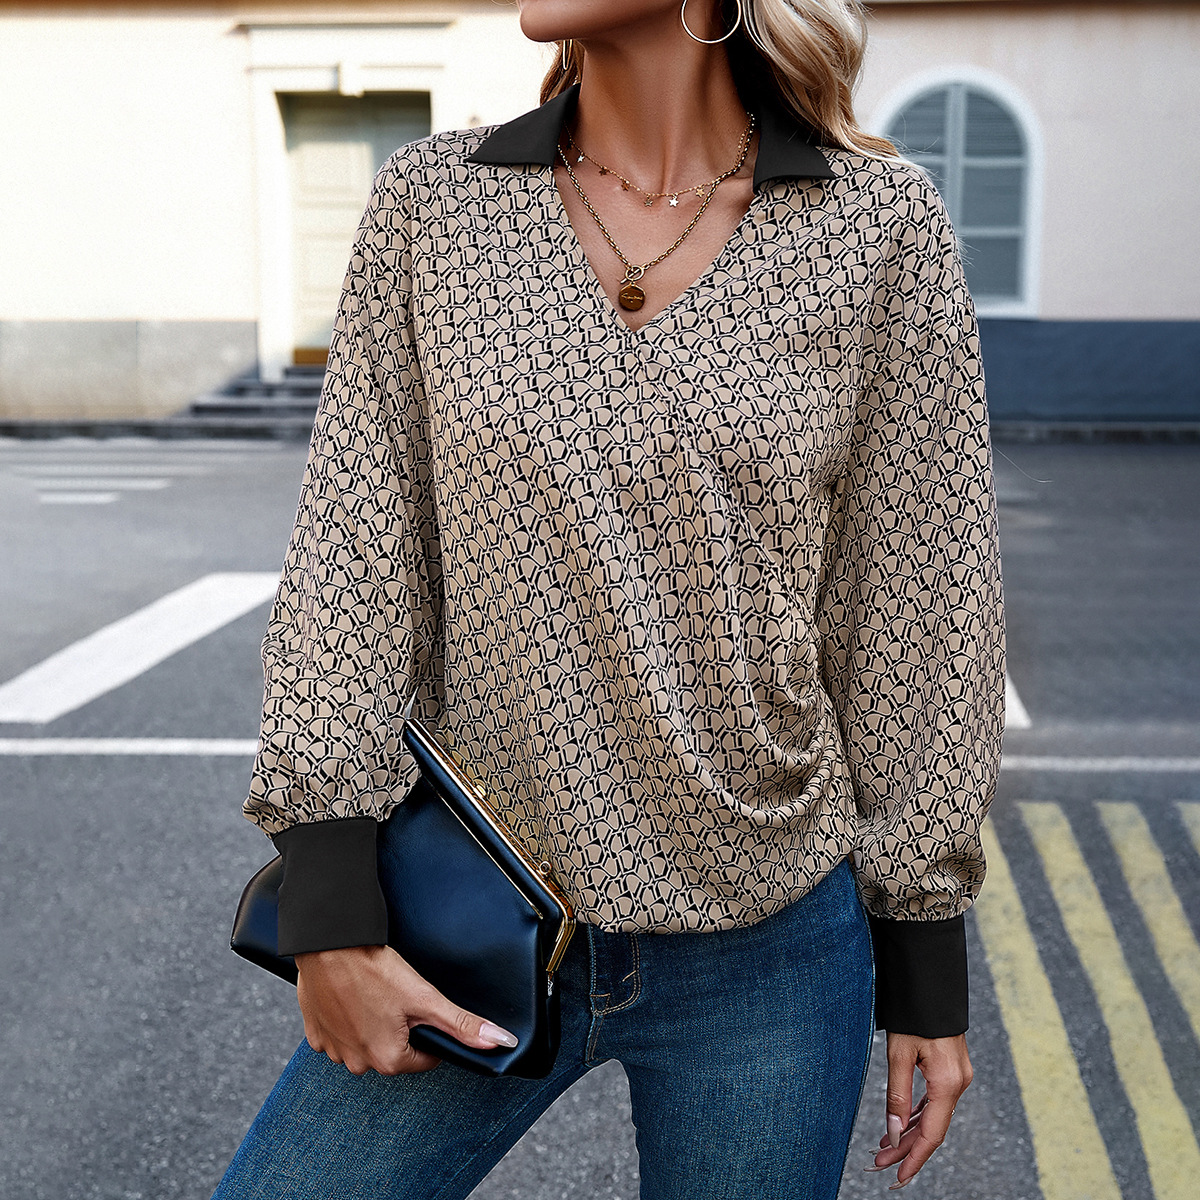 Long sleeve autumn and winter Casual tops for women